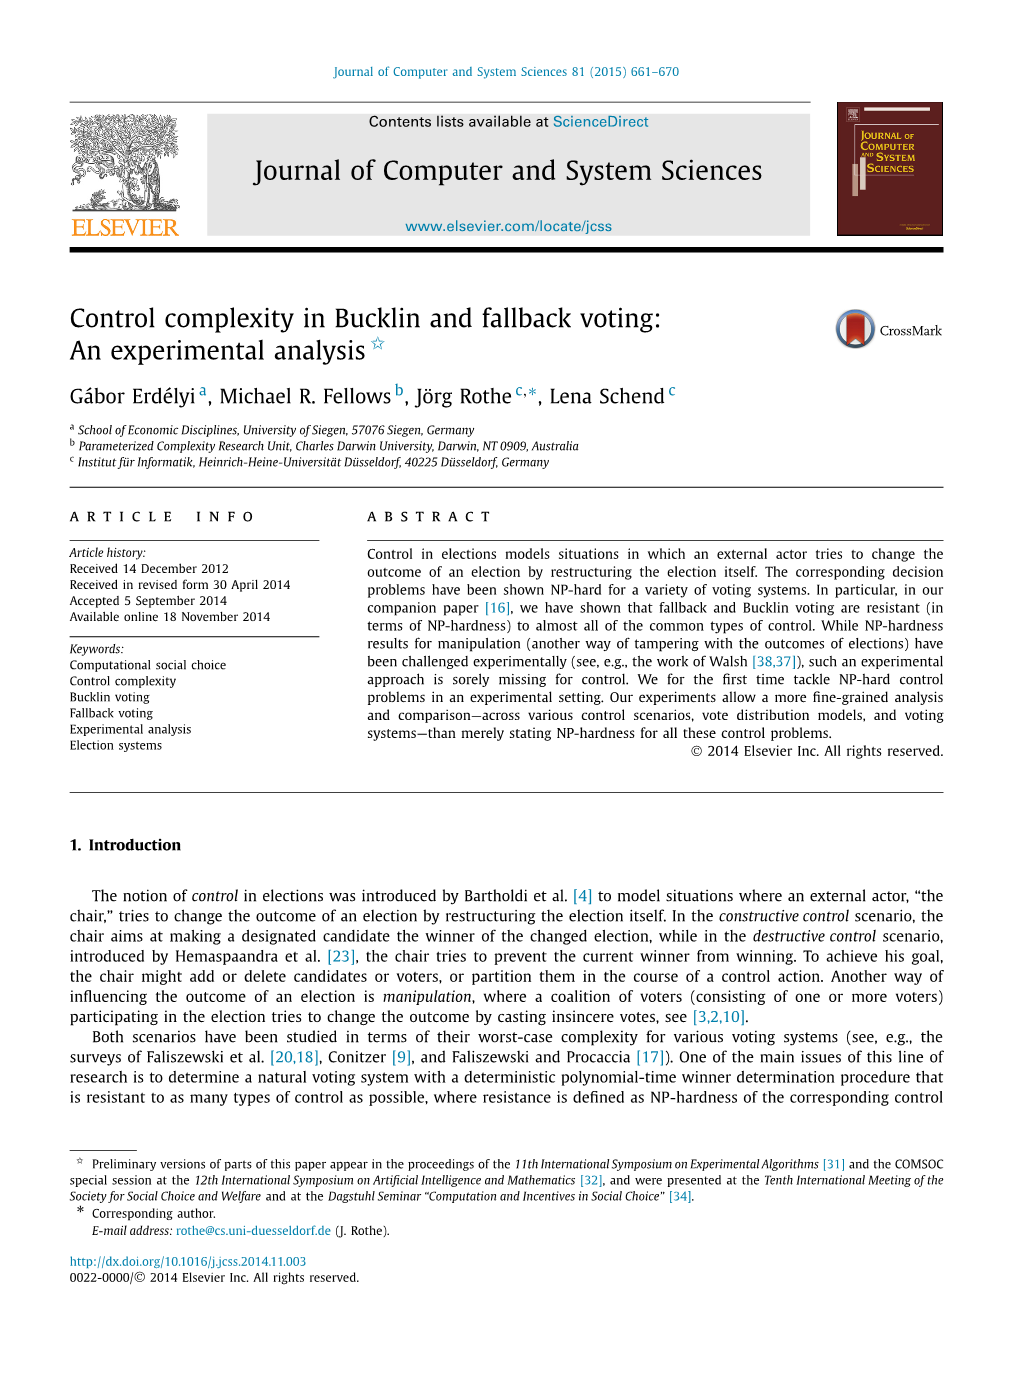 Control Complexity in Bucklin and Fallback Voting: an Experimental Analysis